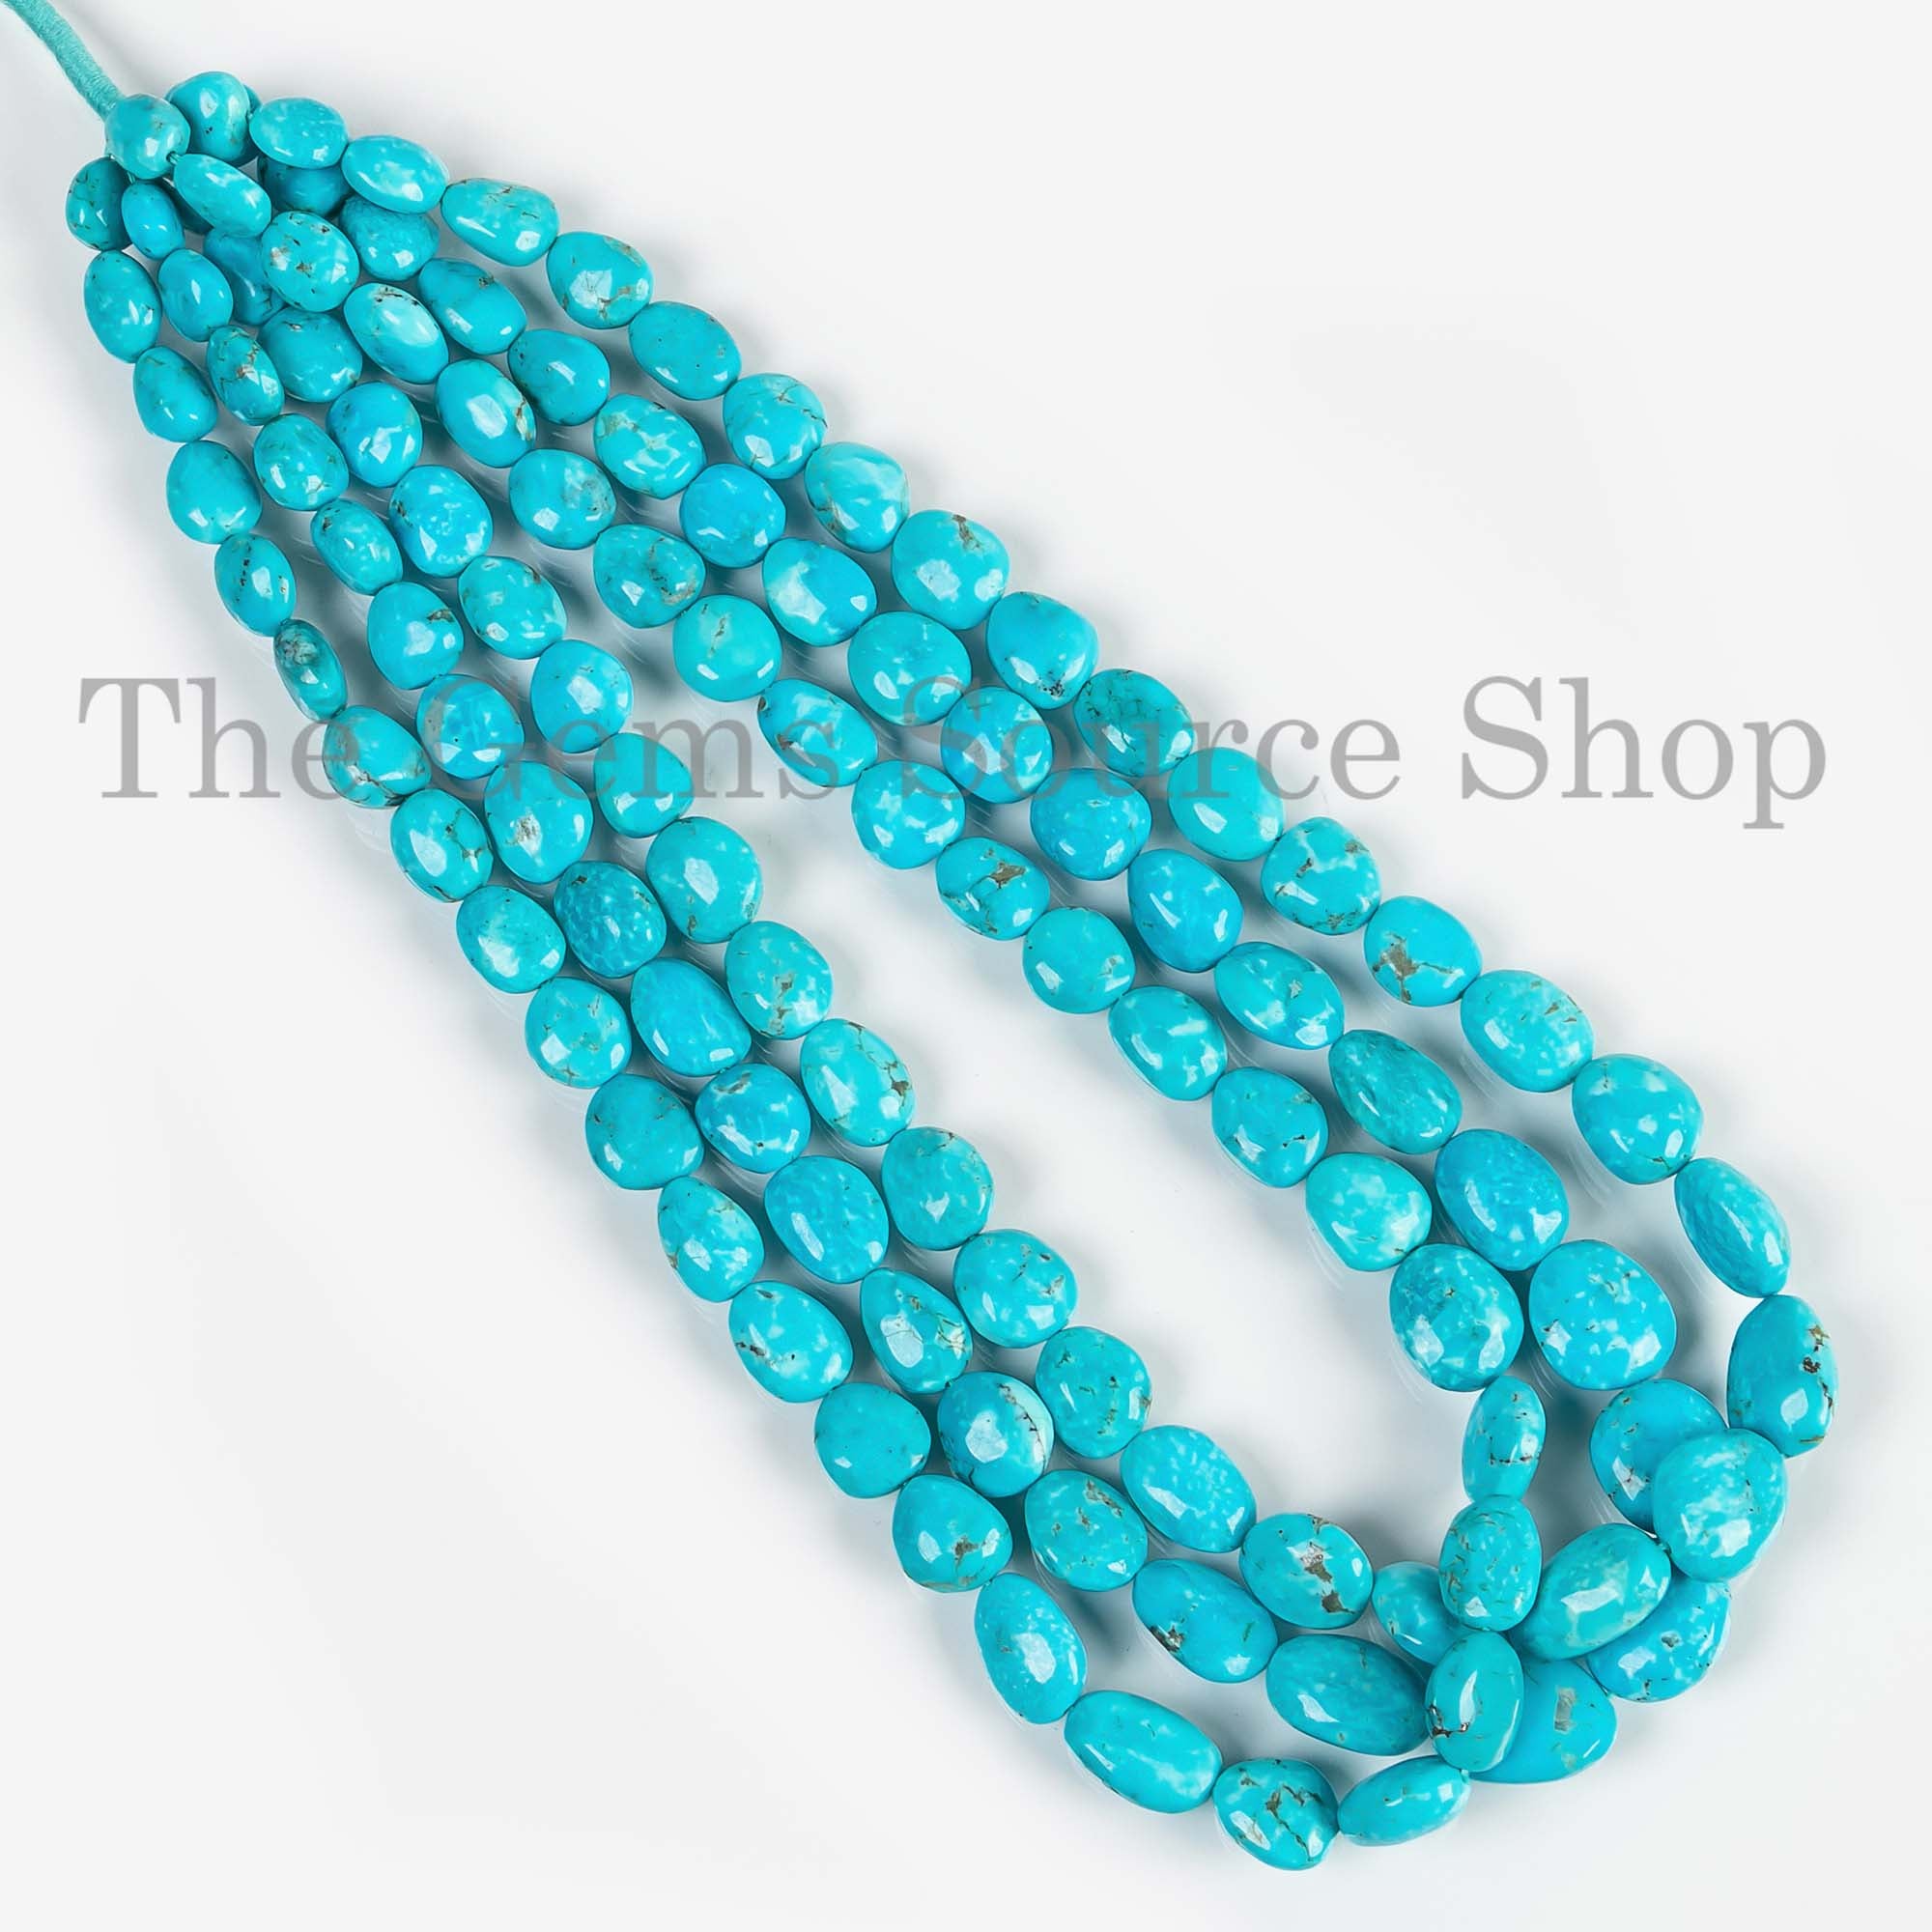 Turquoise Gemstone Beads, 9x10-11x16mm Wholesale Beads, Fancy Nugget Beads For Jewelry, Necklace Loose Craft Beads